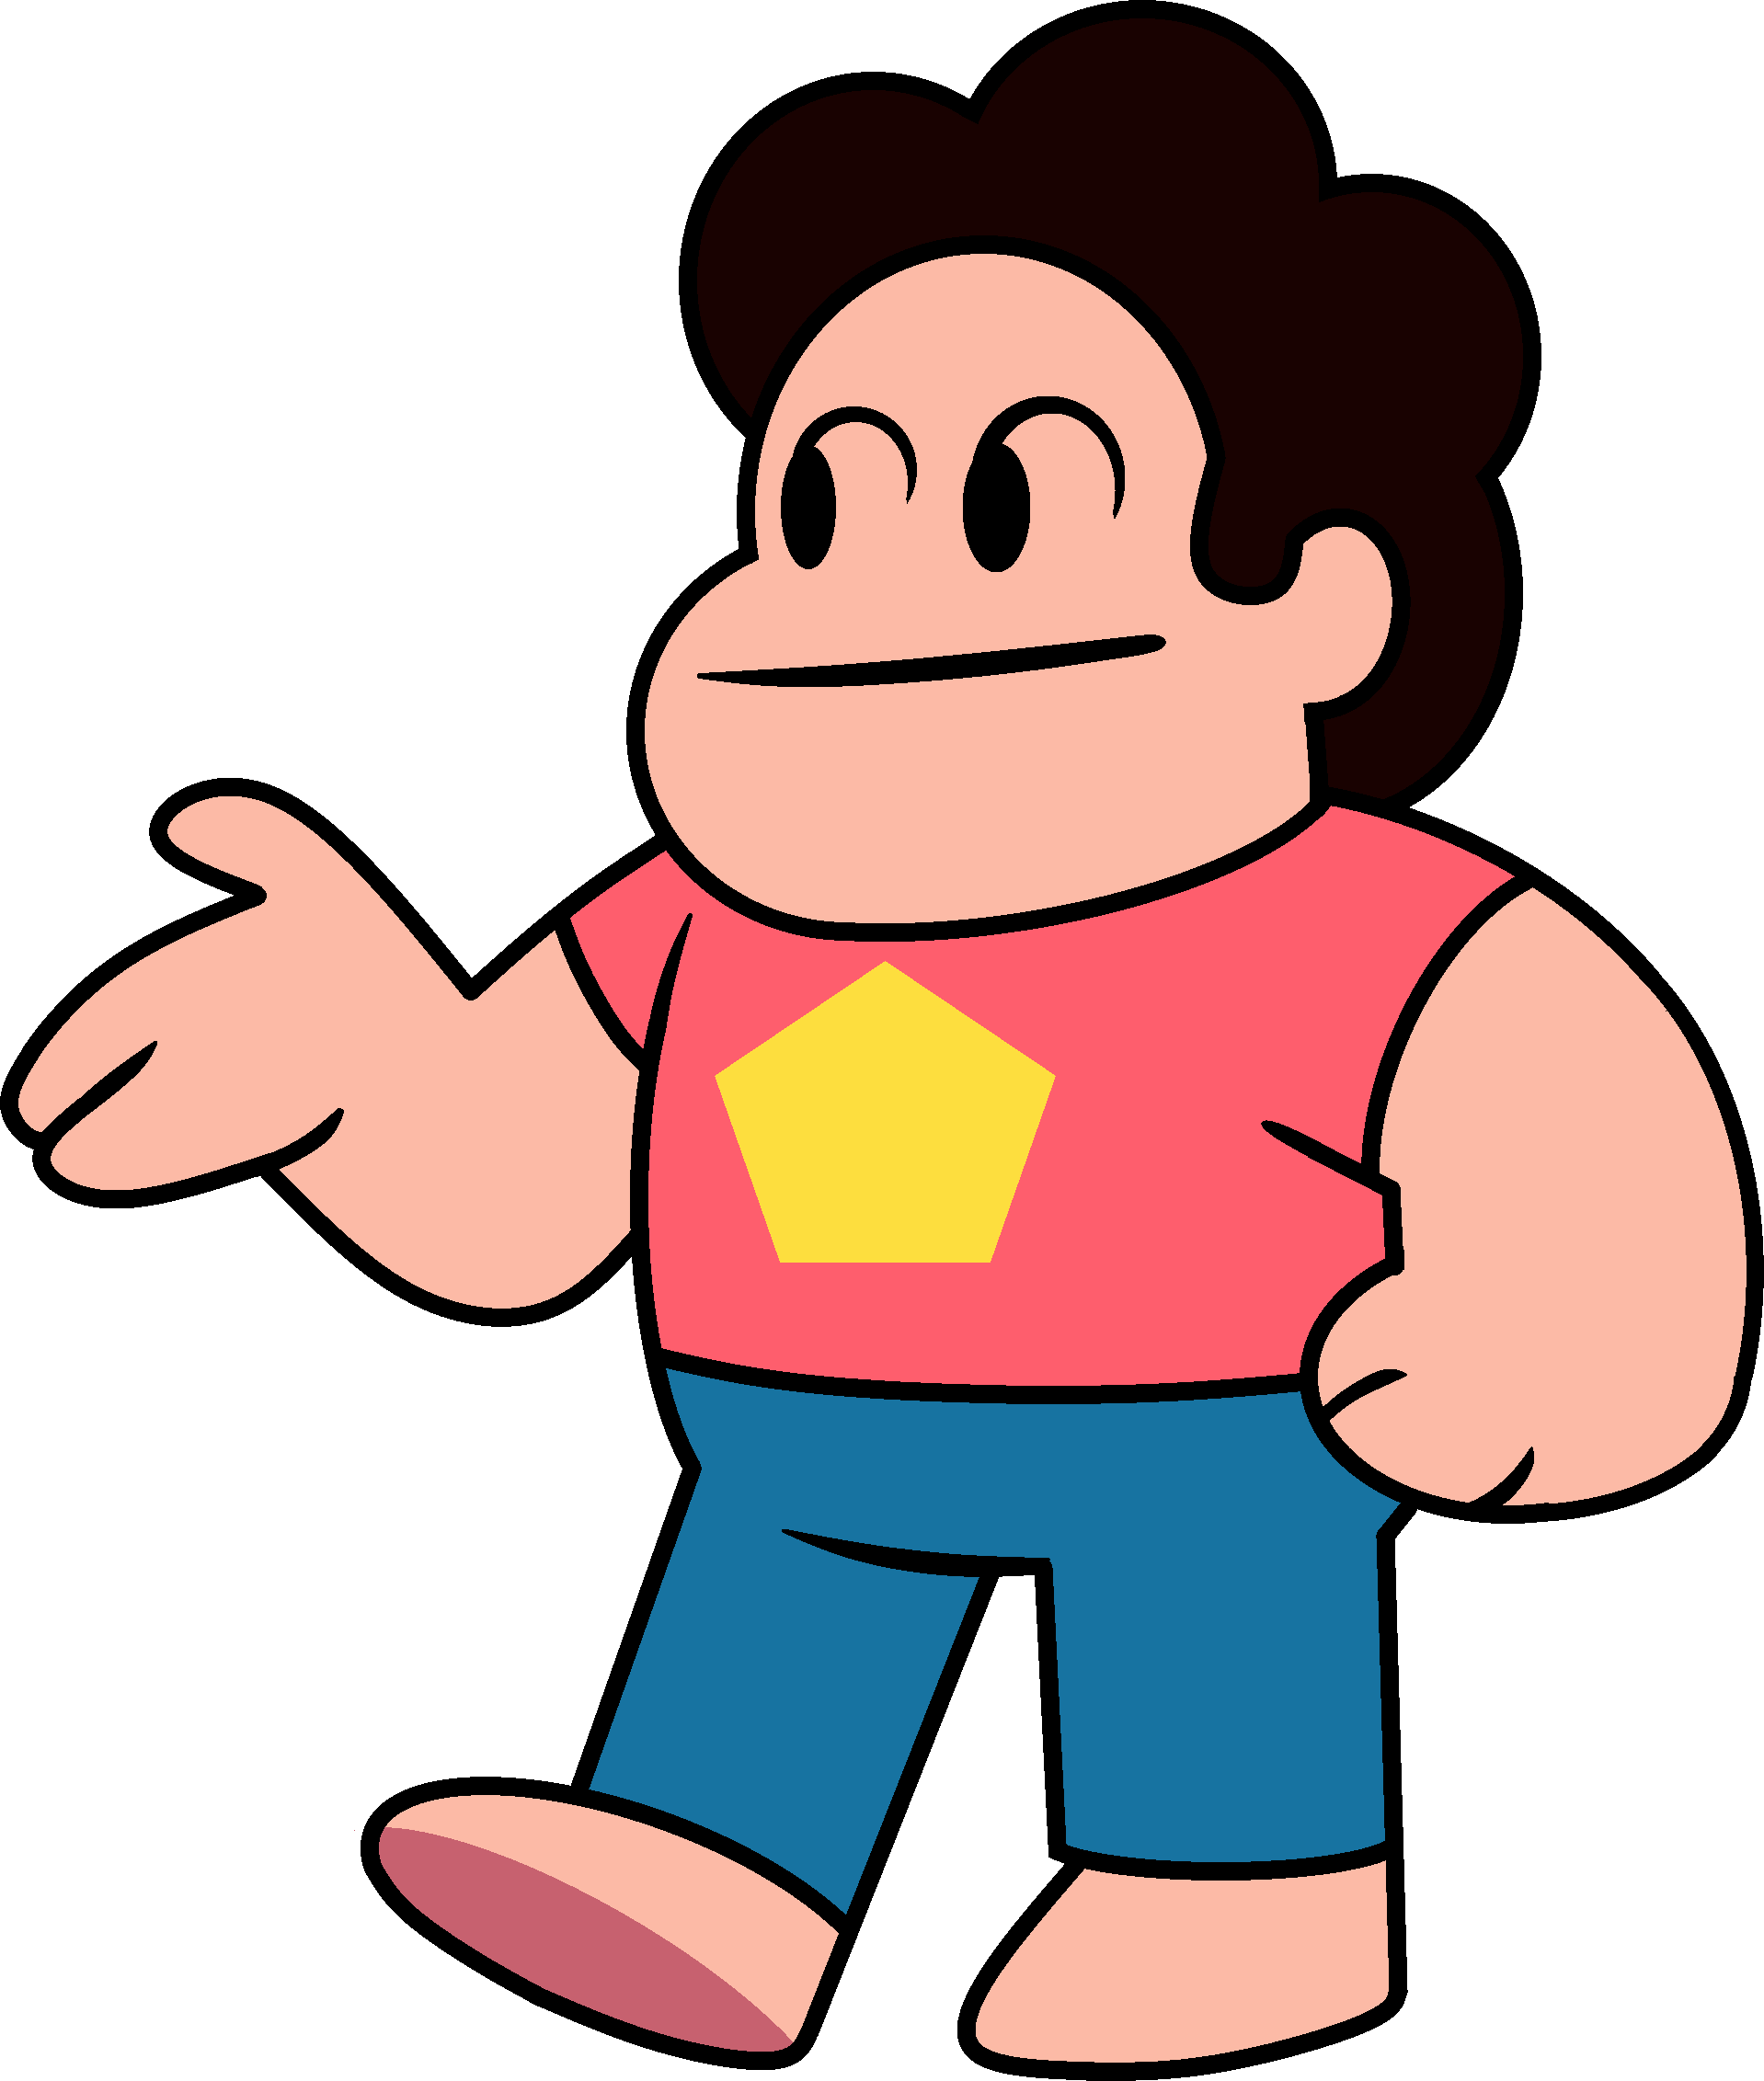 Download PNG image - Steven Universe Series PNG Free Download 